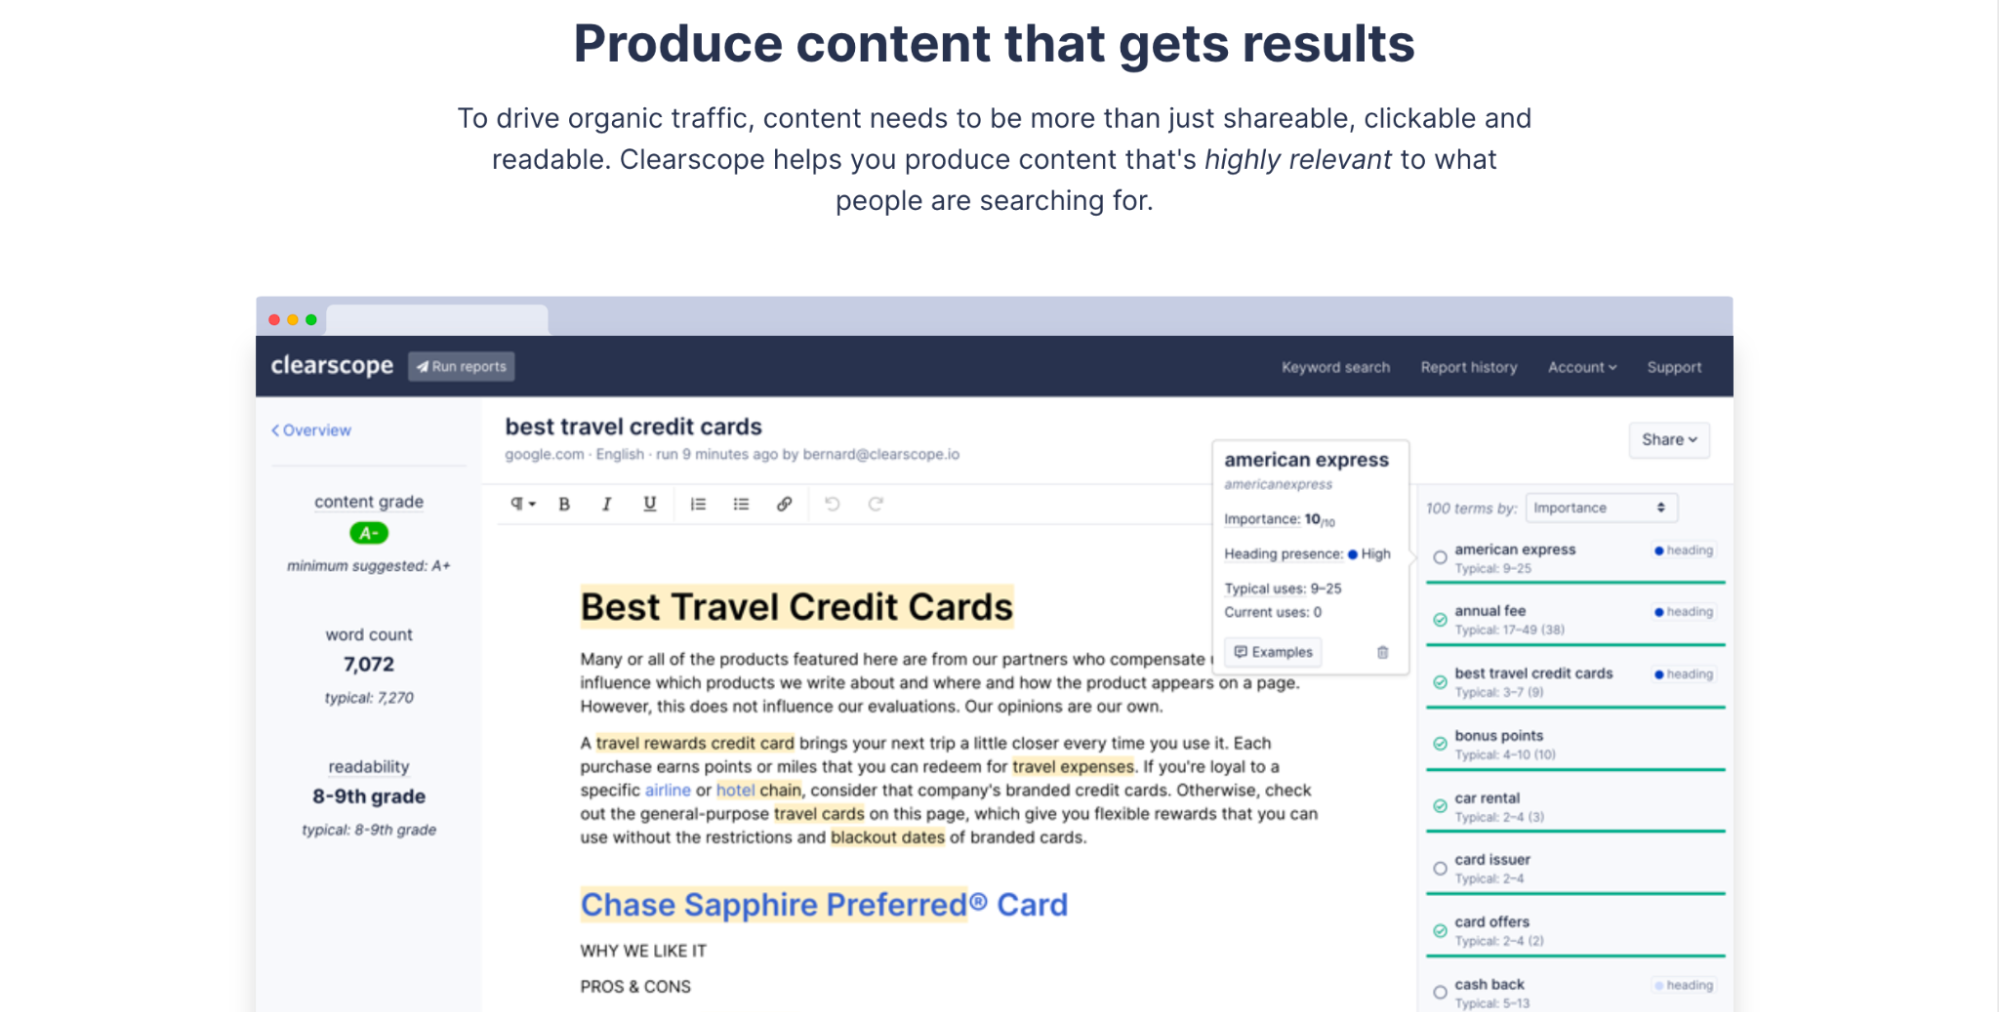 A content optimization platform like Clearscope can provide S E O advice with a focus on producing results-driven content